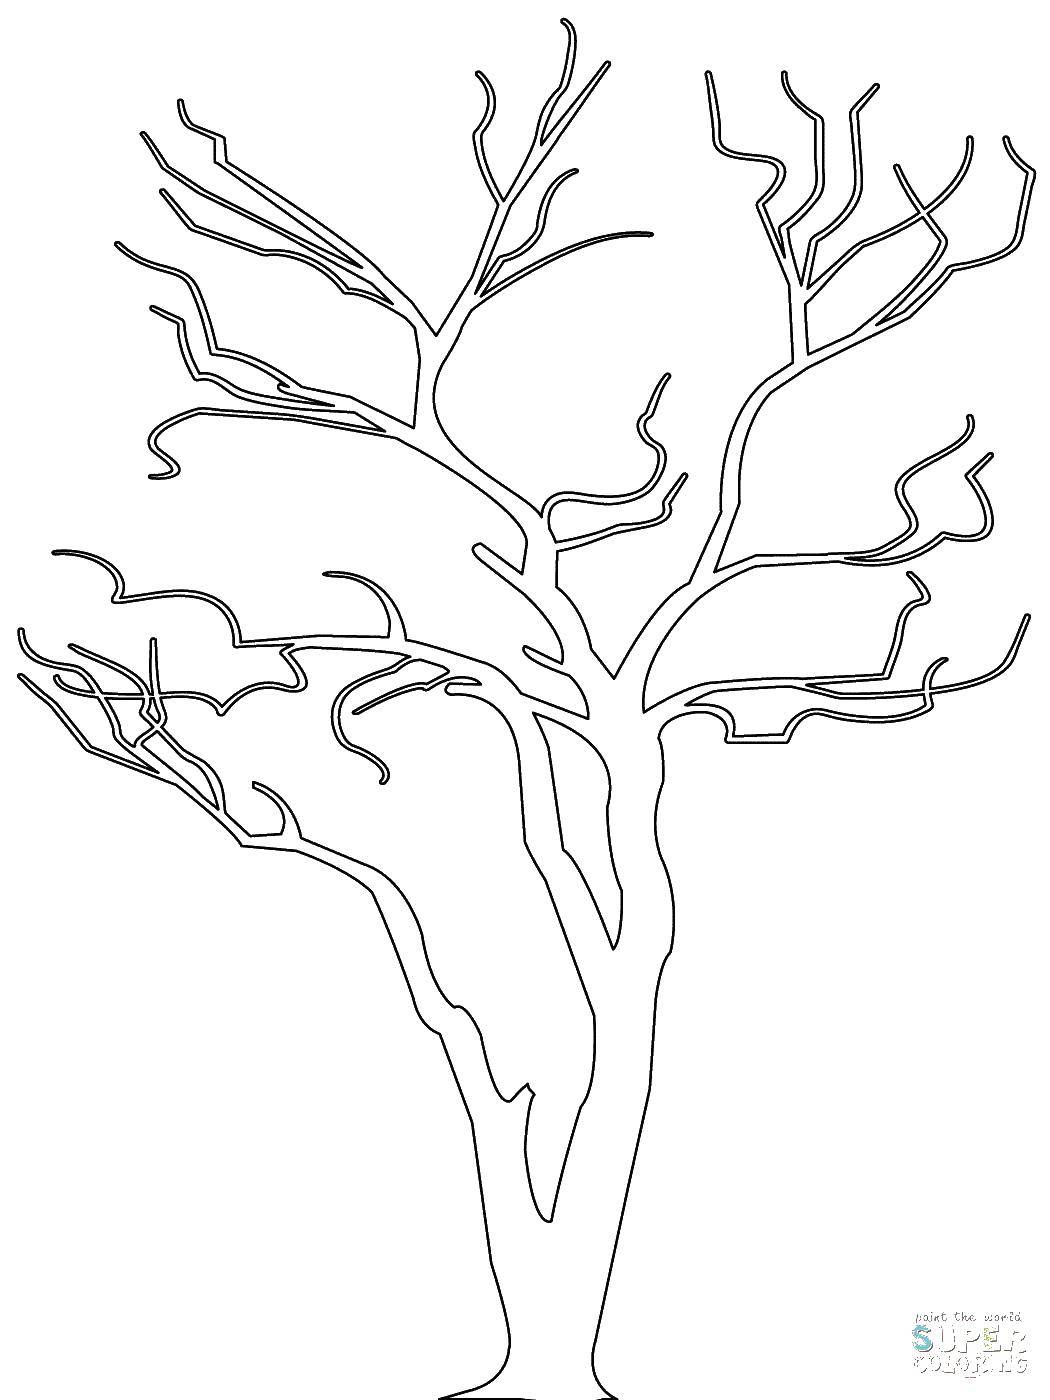 Coloring Thin dry wood. Category The contour of the tree. Tags:  The trees.